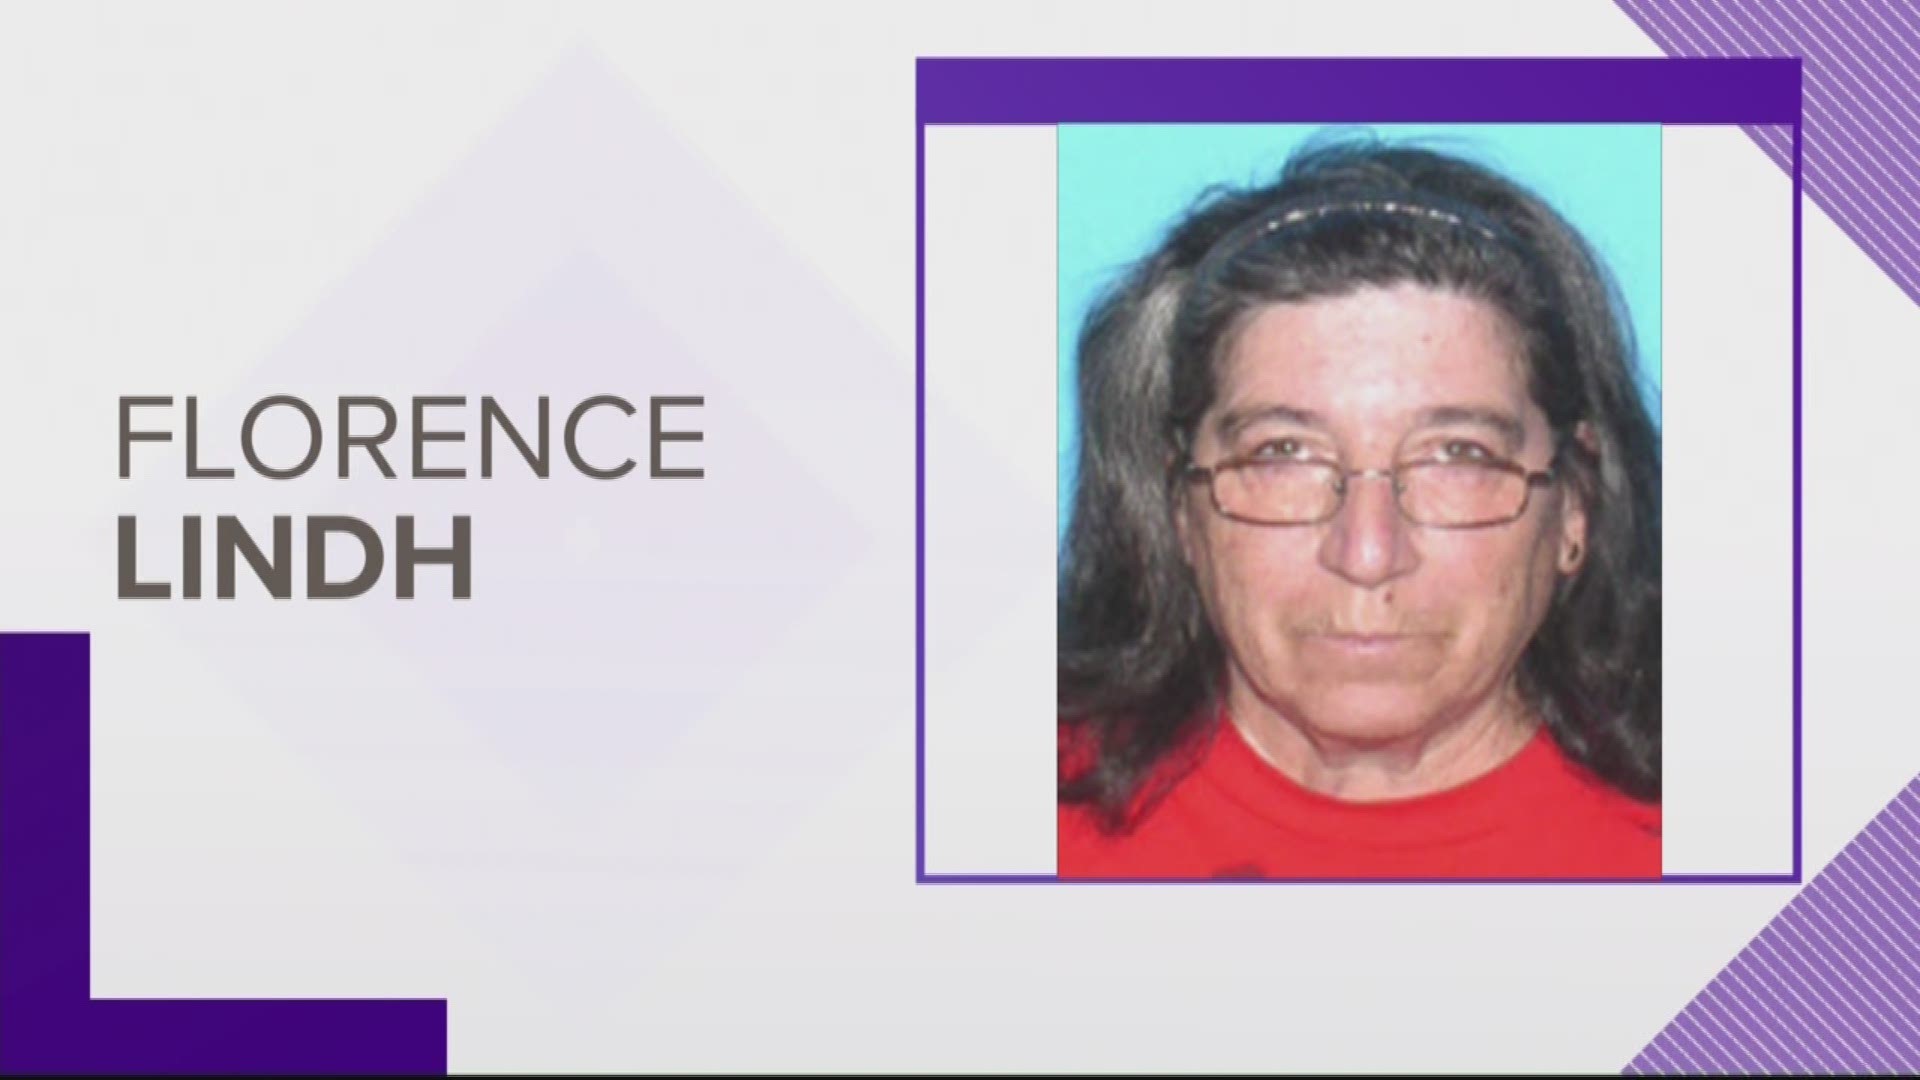 Deputies said Florence Lindhmay be traveling in a silver 2000 Honda Civic with a Florida tag number of Z07JFR.